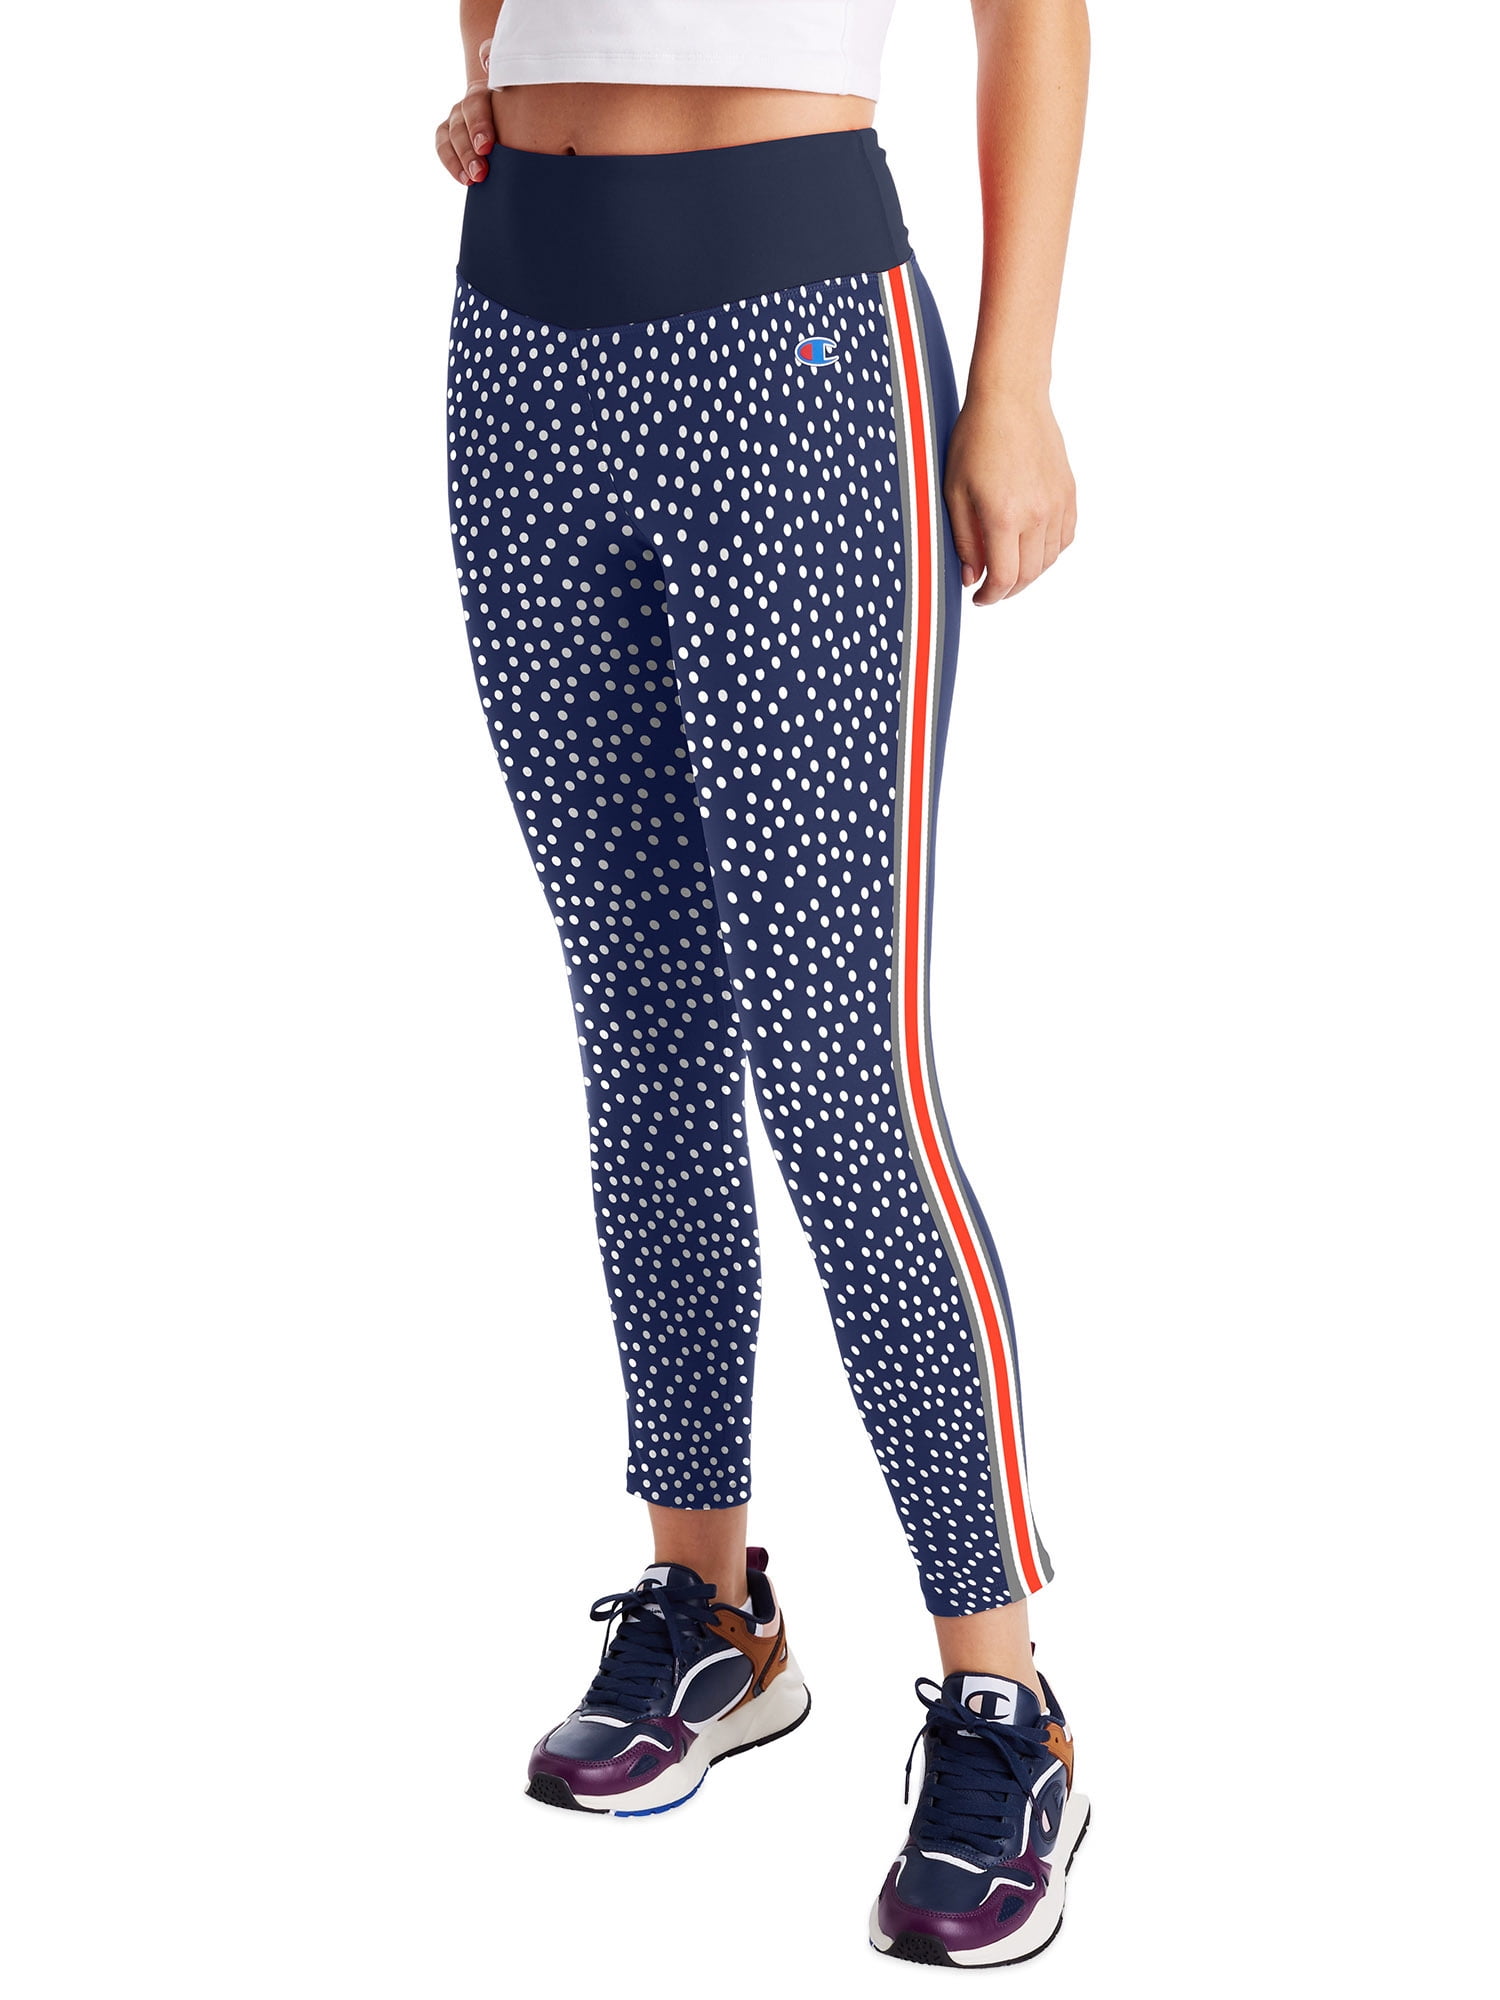 Champion Women's Authentic 7/8 Length Tights - Macy's